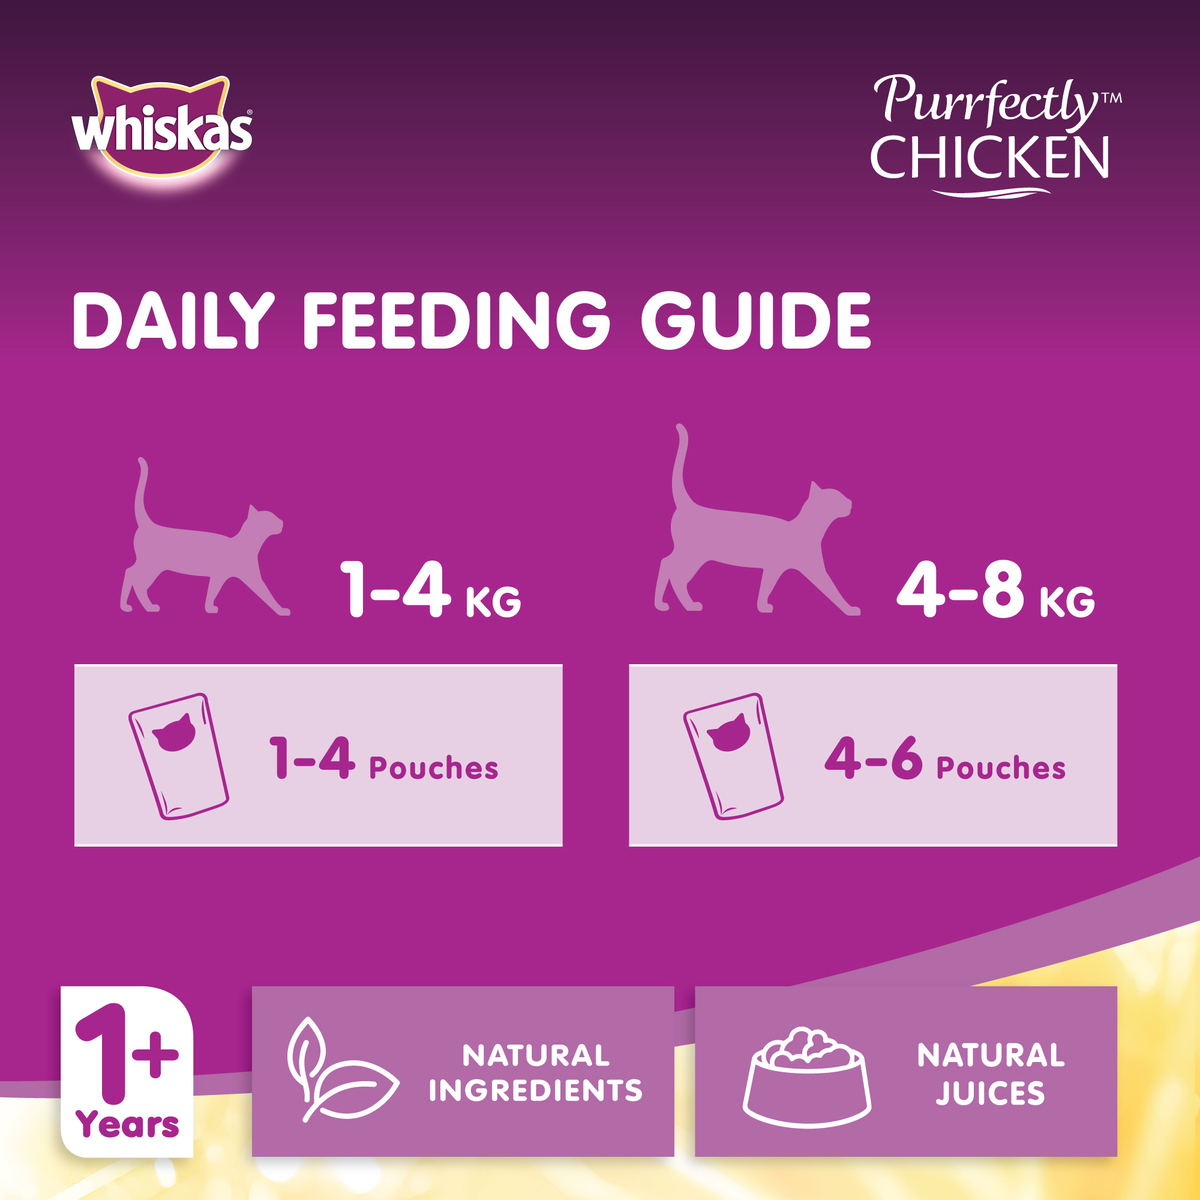 Whiskas Purrfectly Chicken Entree Wet Cat Food for Adult Cats 1+ Years 85 g